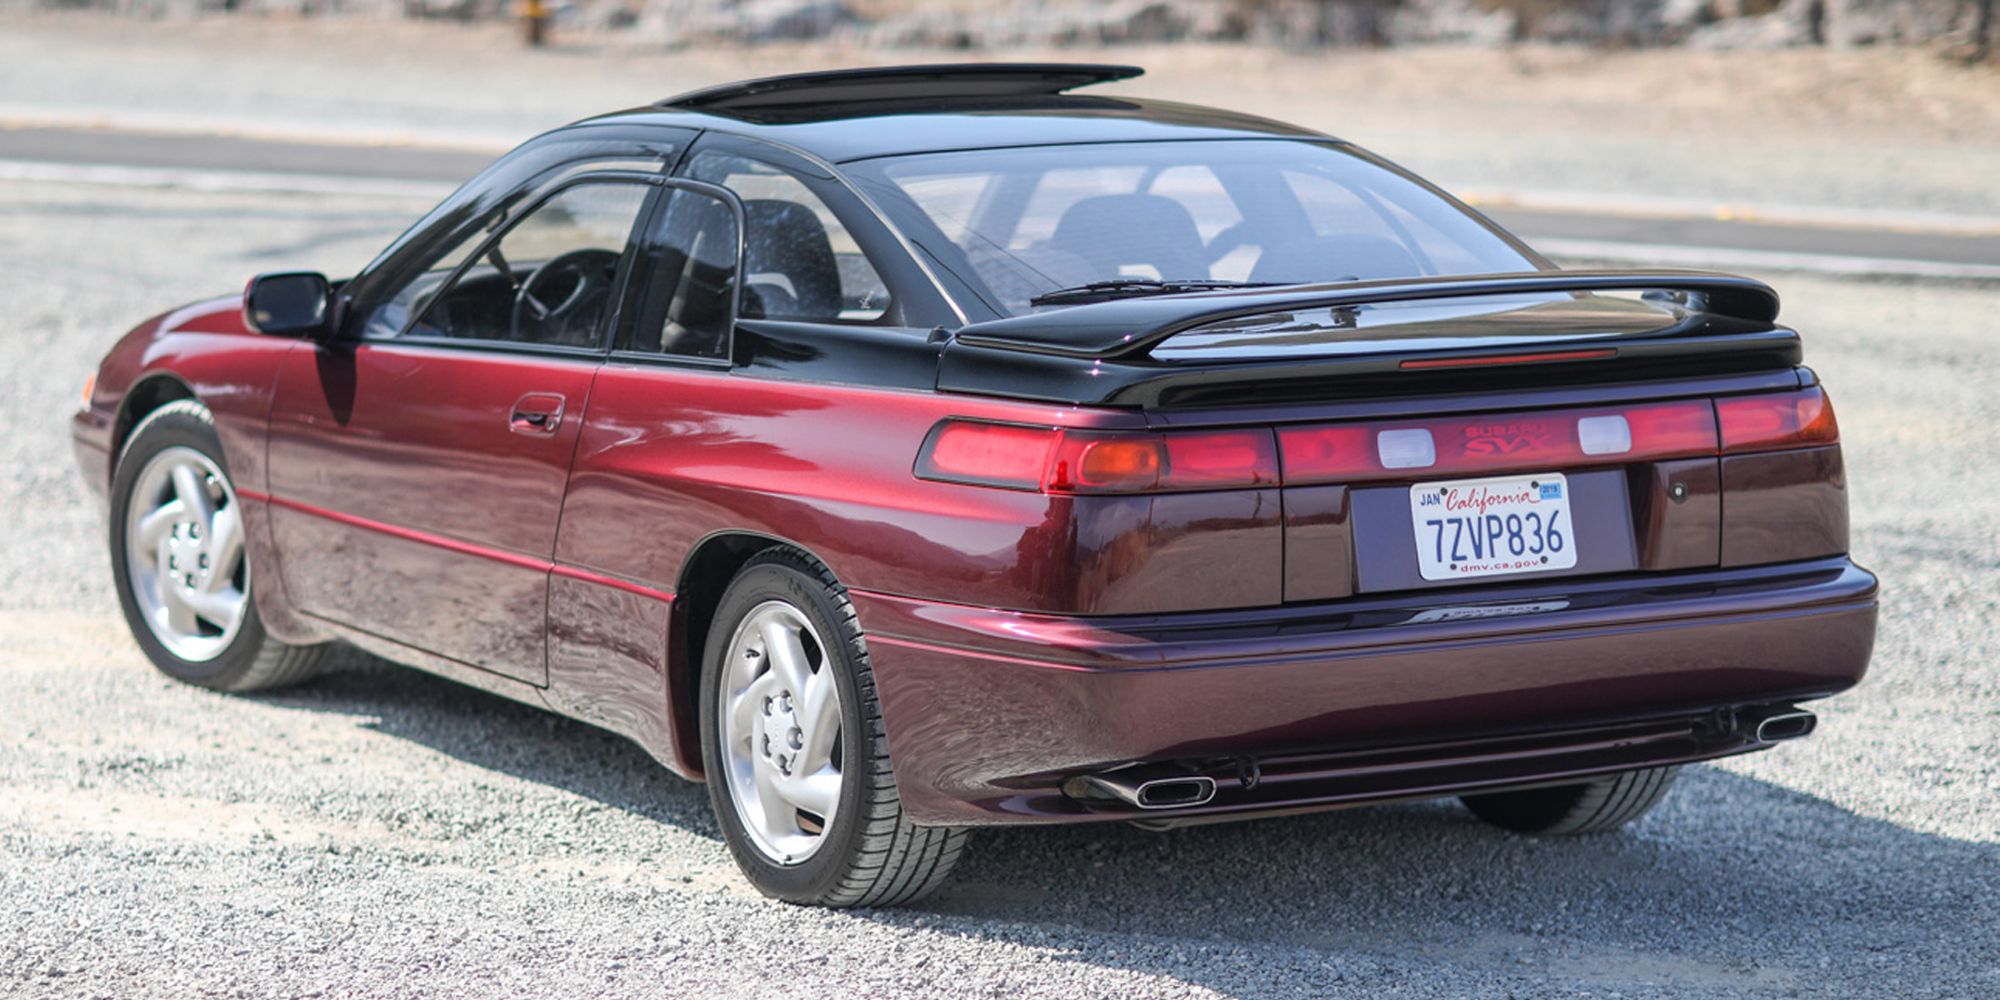 The rear of the SVX